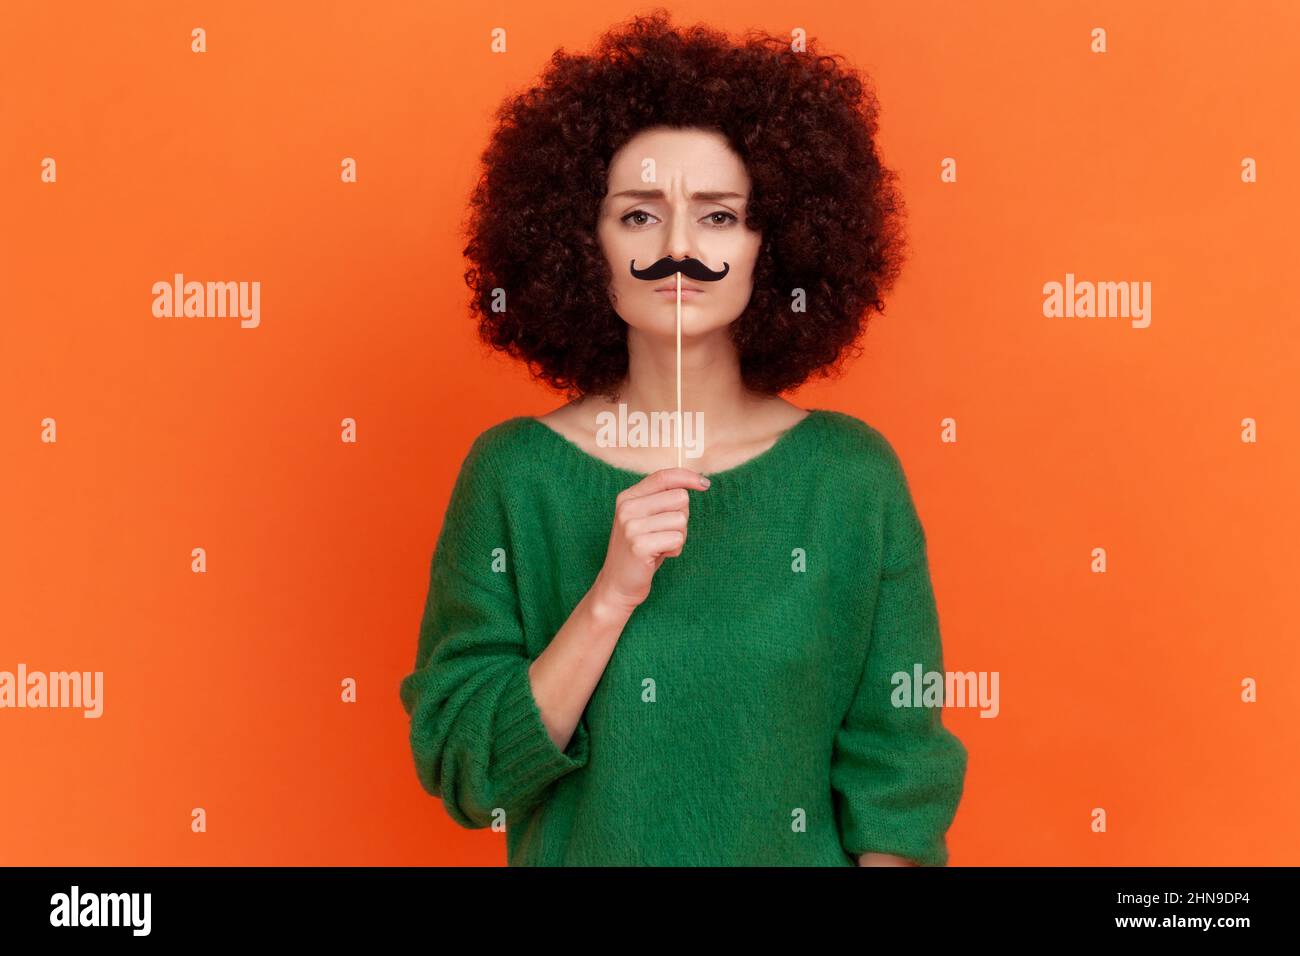 Funny woman with Afro hairstyle wearing green casual style sweater standing with paper mustache on stick, festive mood, masquerade Indoor studio shot isolated on orange background. Stock Photo